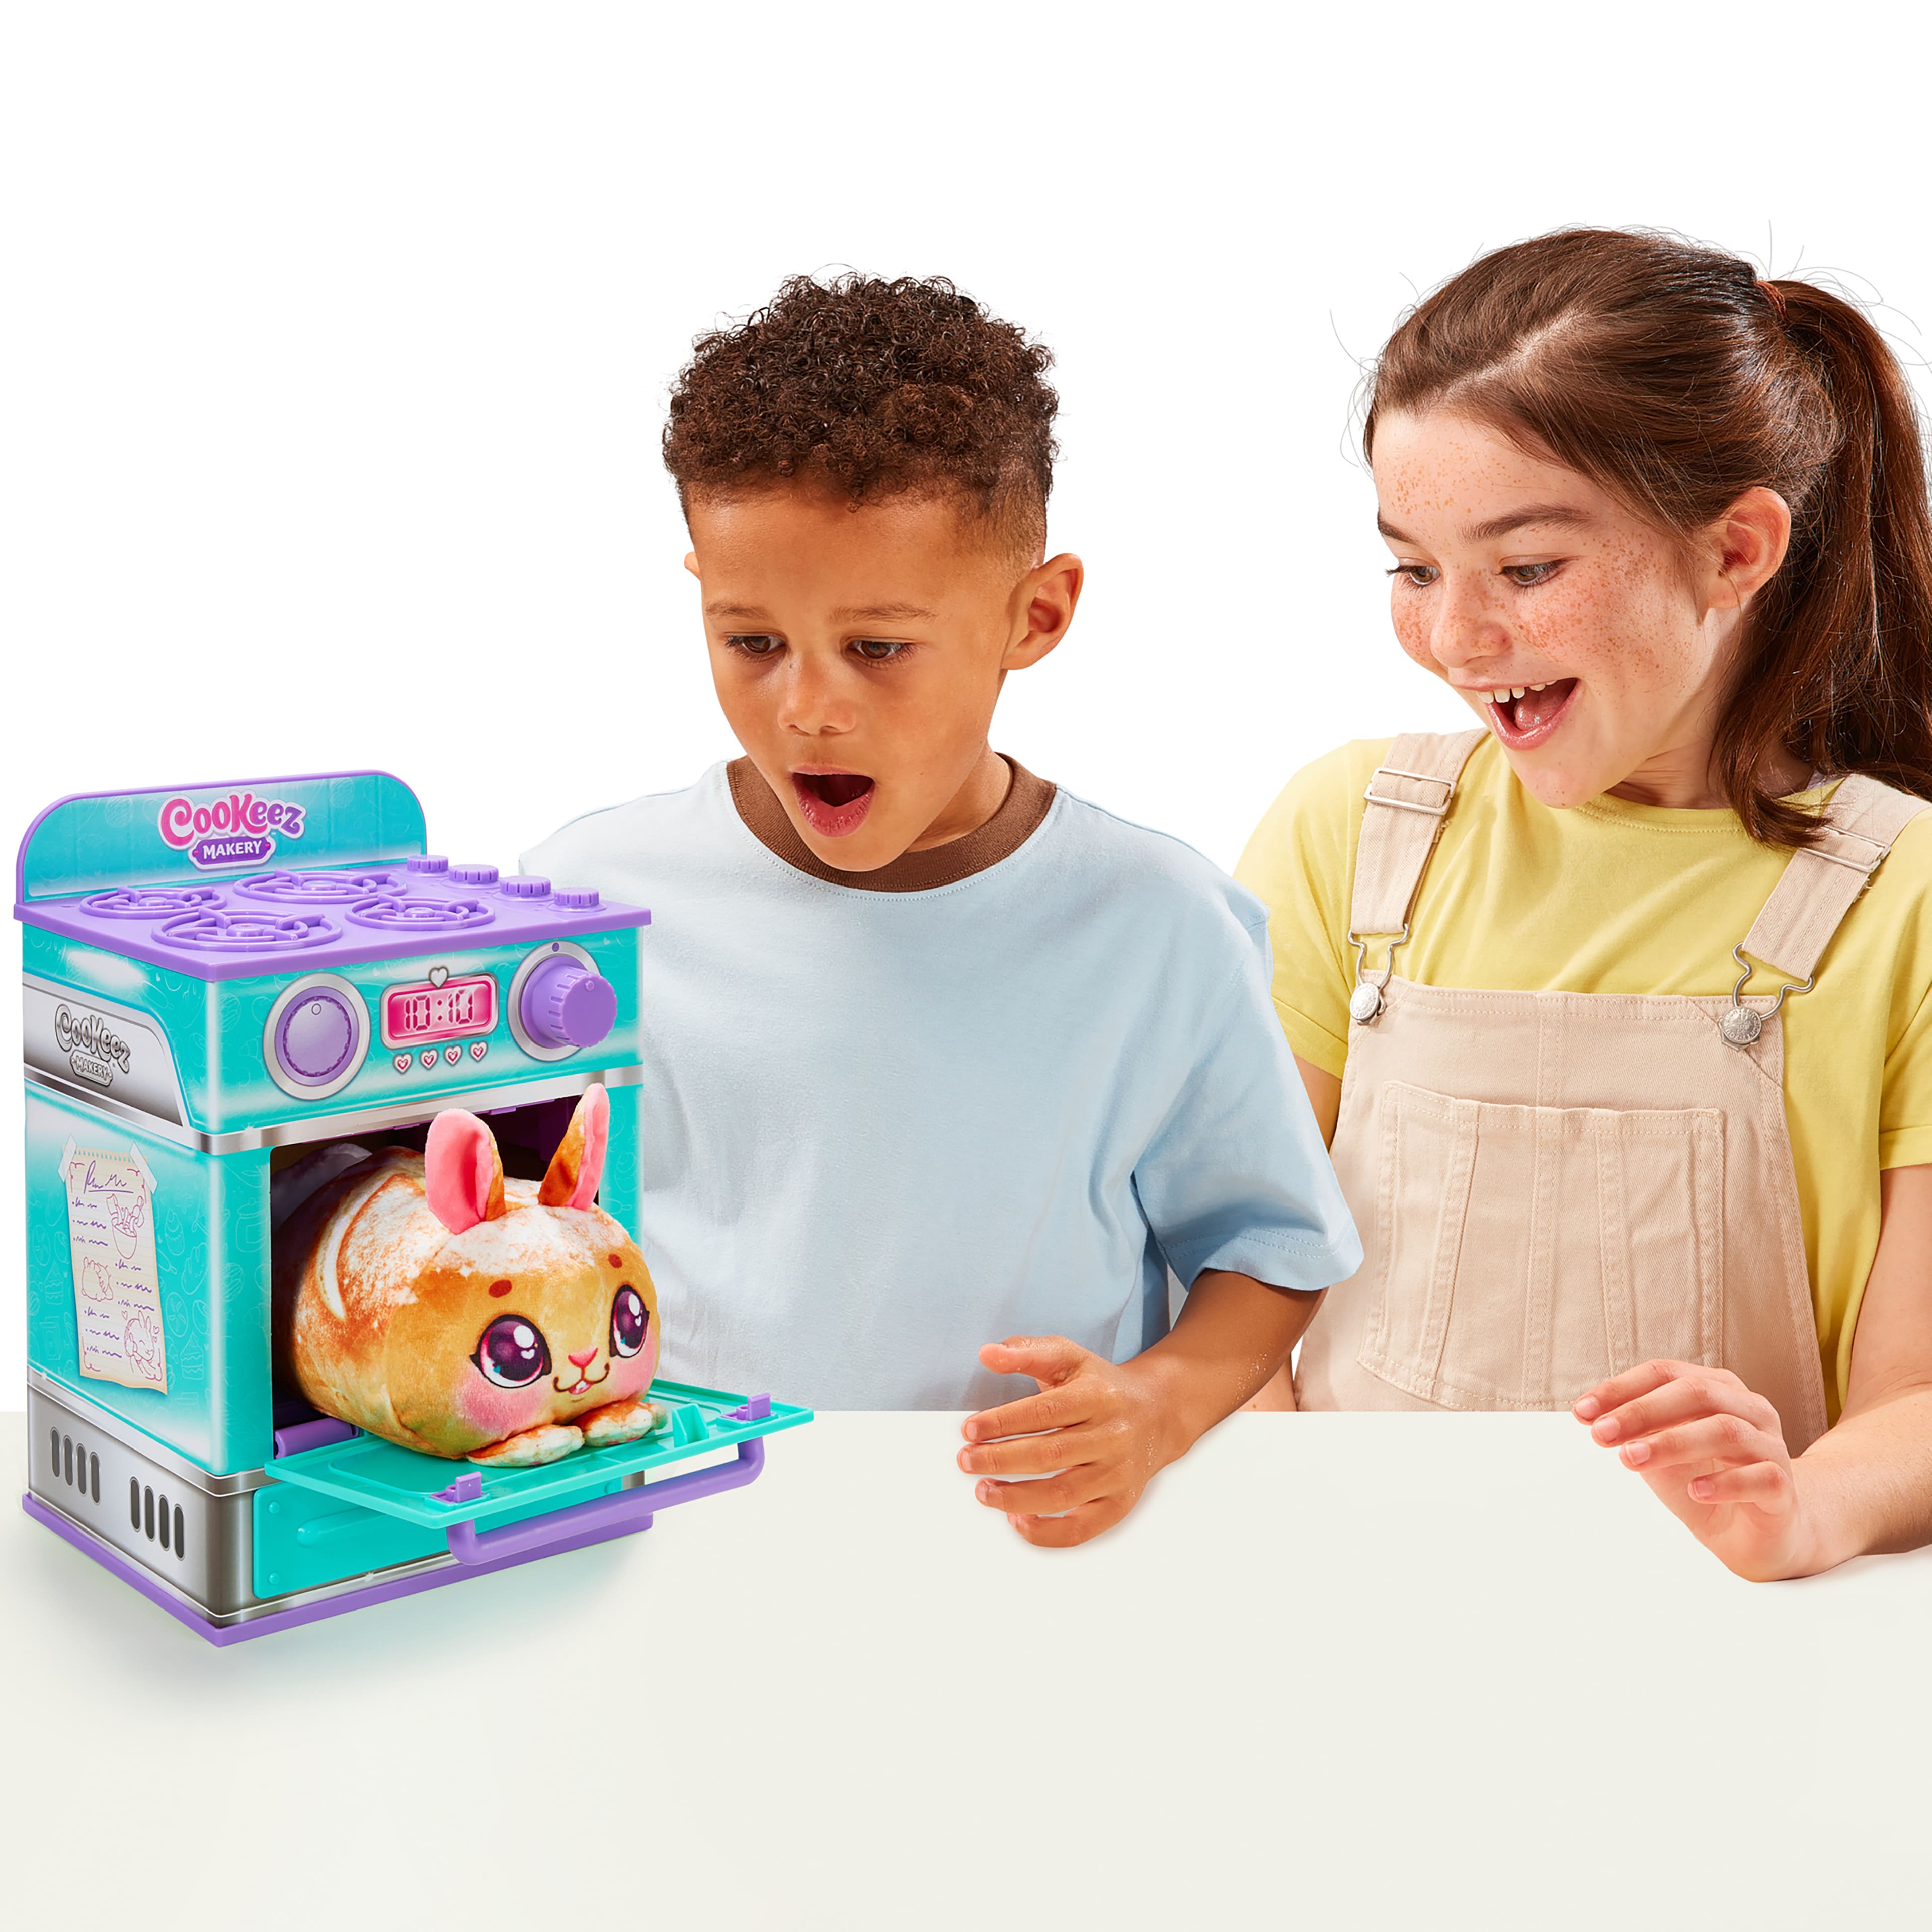 COOKEEZ MAKERY - The Toy Book